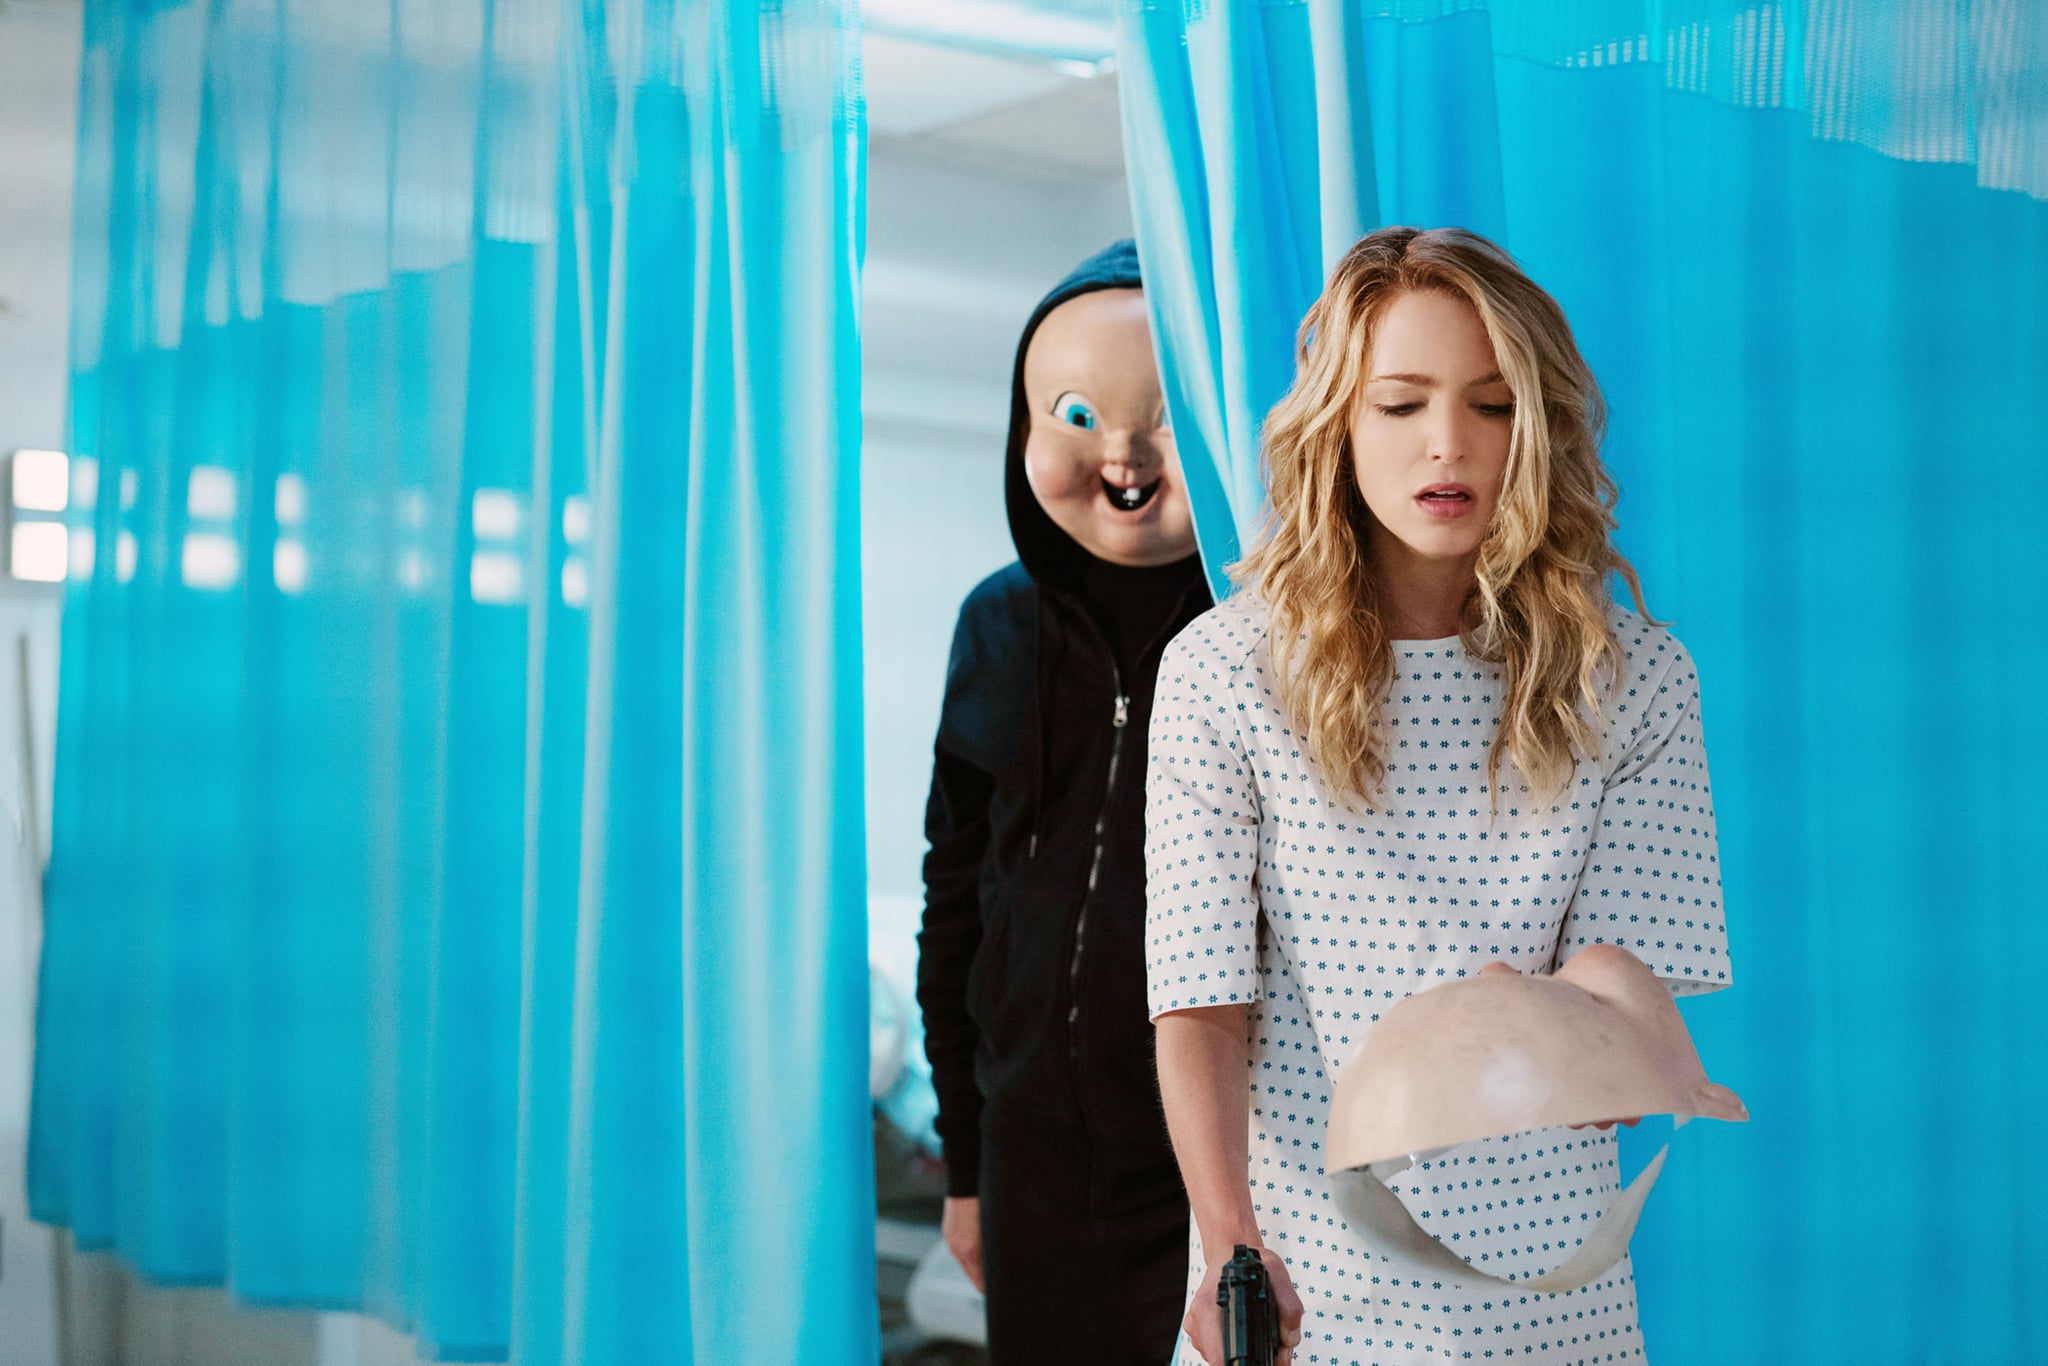 HAPPY DEATH DAY 2U, (aka HAPPY DEATH DAY TO YOU), from left: 'Babyface', Jessica Rothe, 2019. ph: Michele K. Short /  Universal /Courtesy Everett Collection